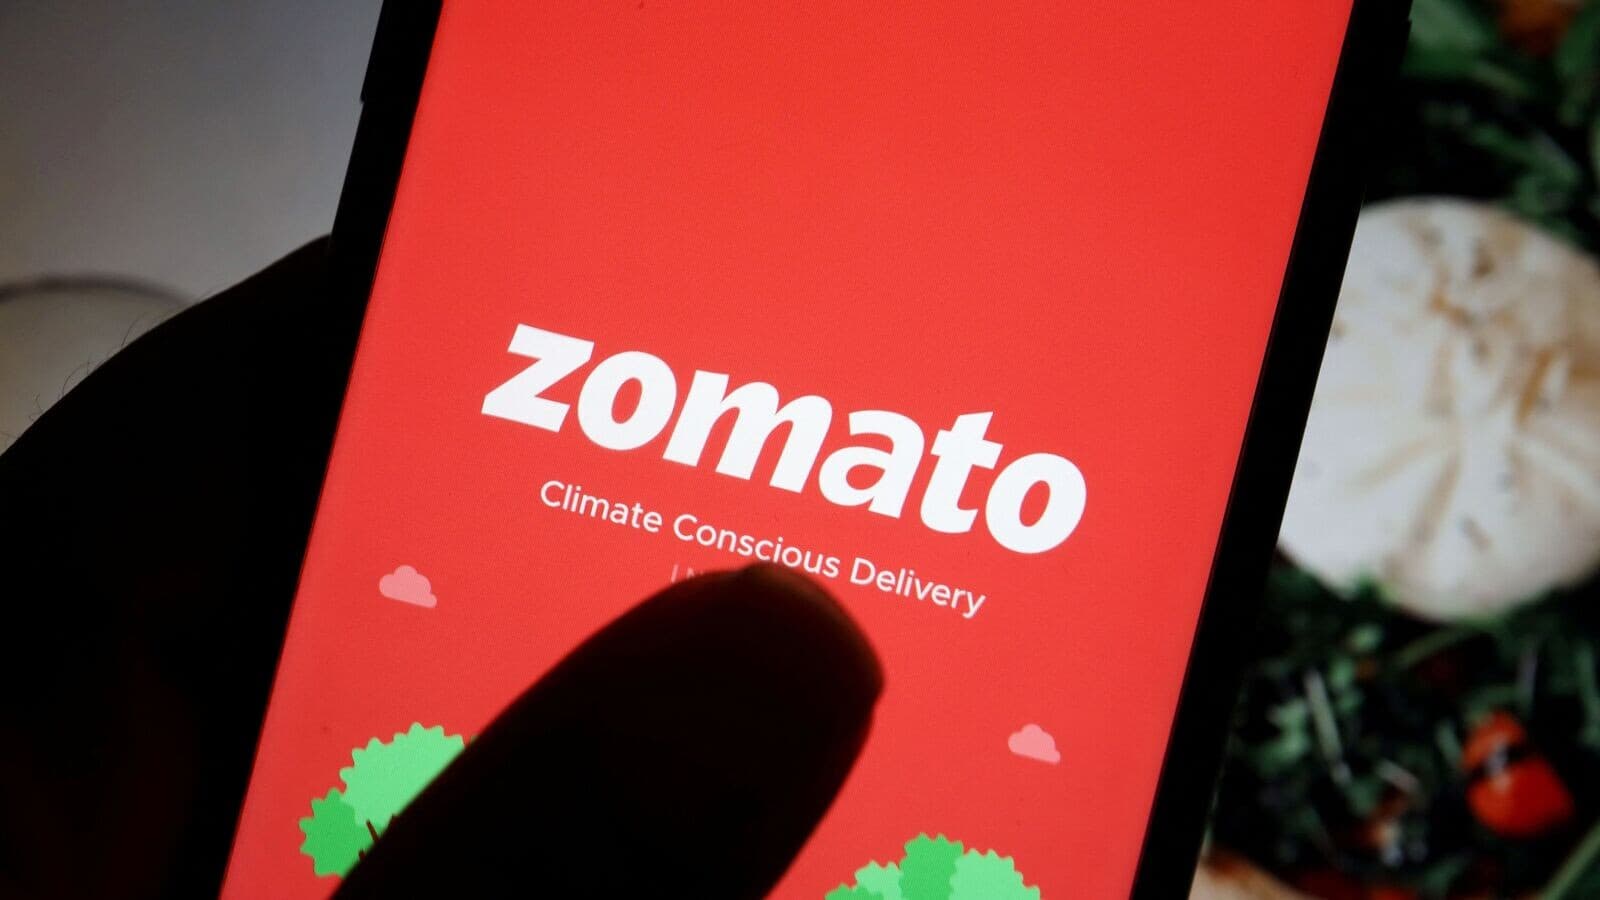 Zomato hit with ₹9.45 crore GST notice, plans to appeal